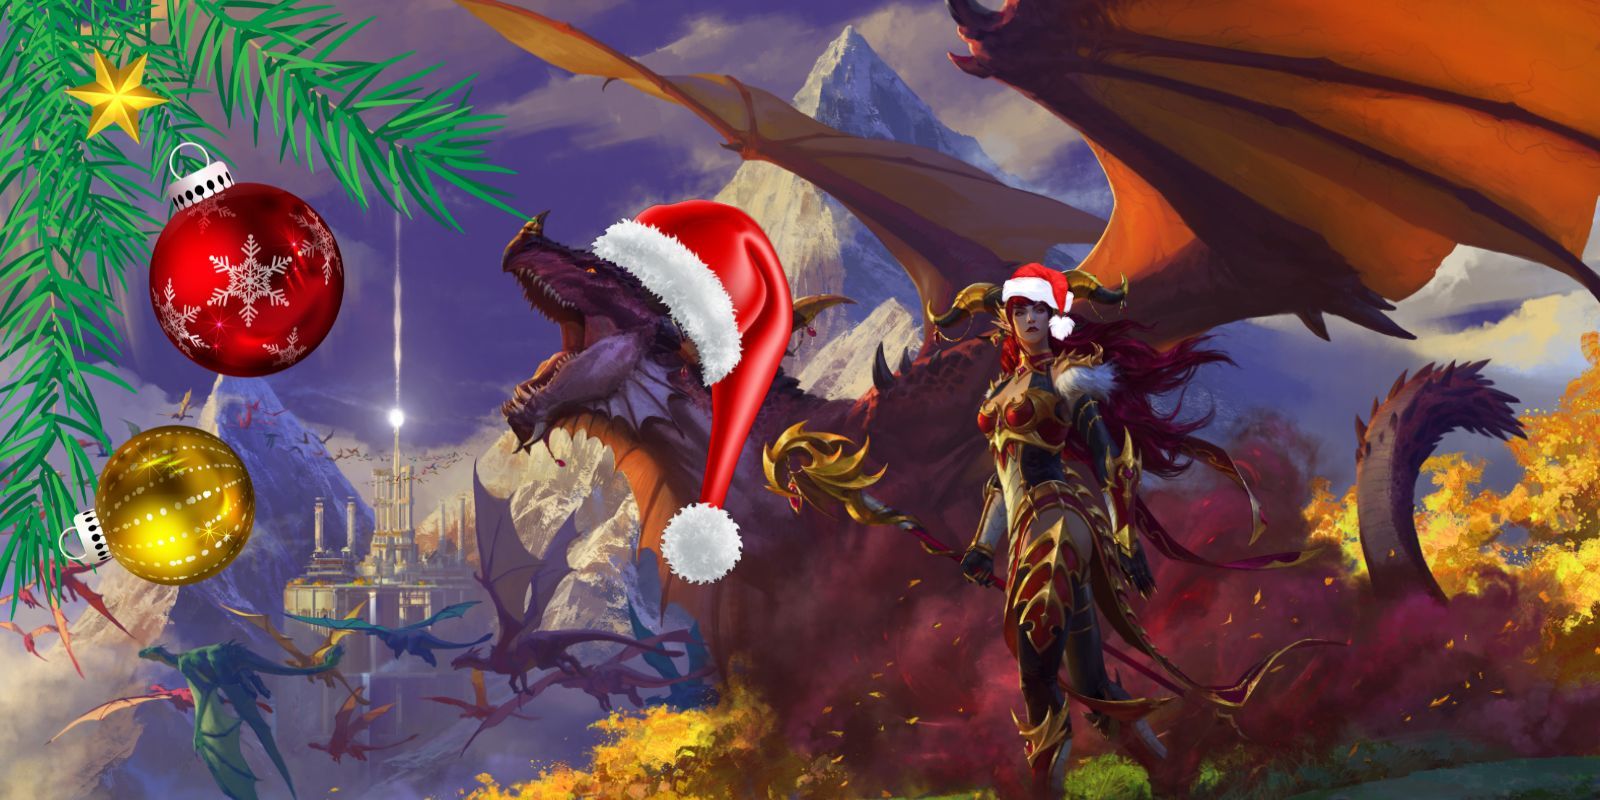 brendan baggs recommends World Of Warcraft Christmas